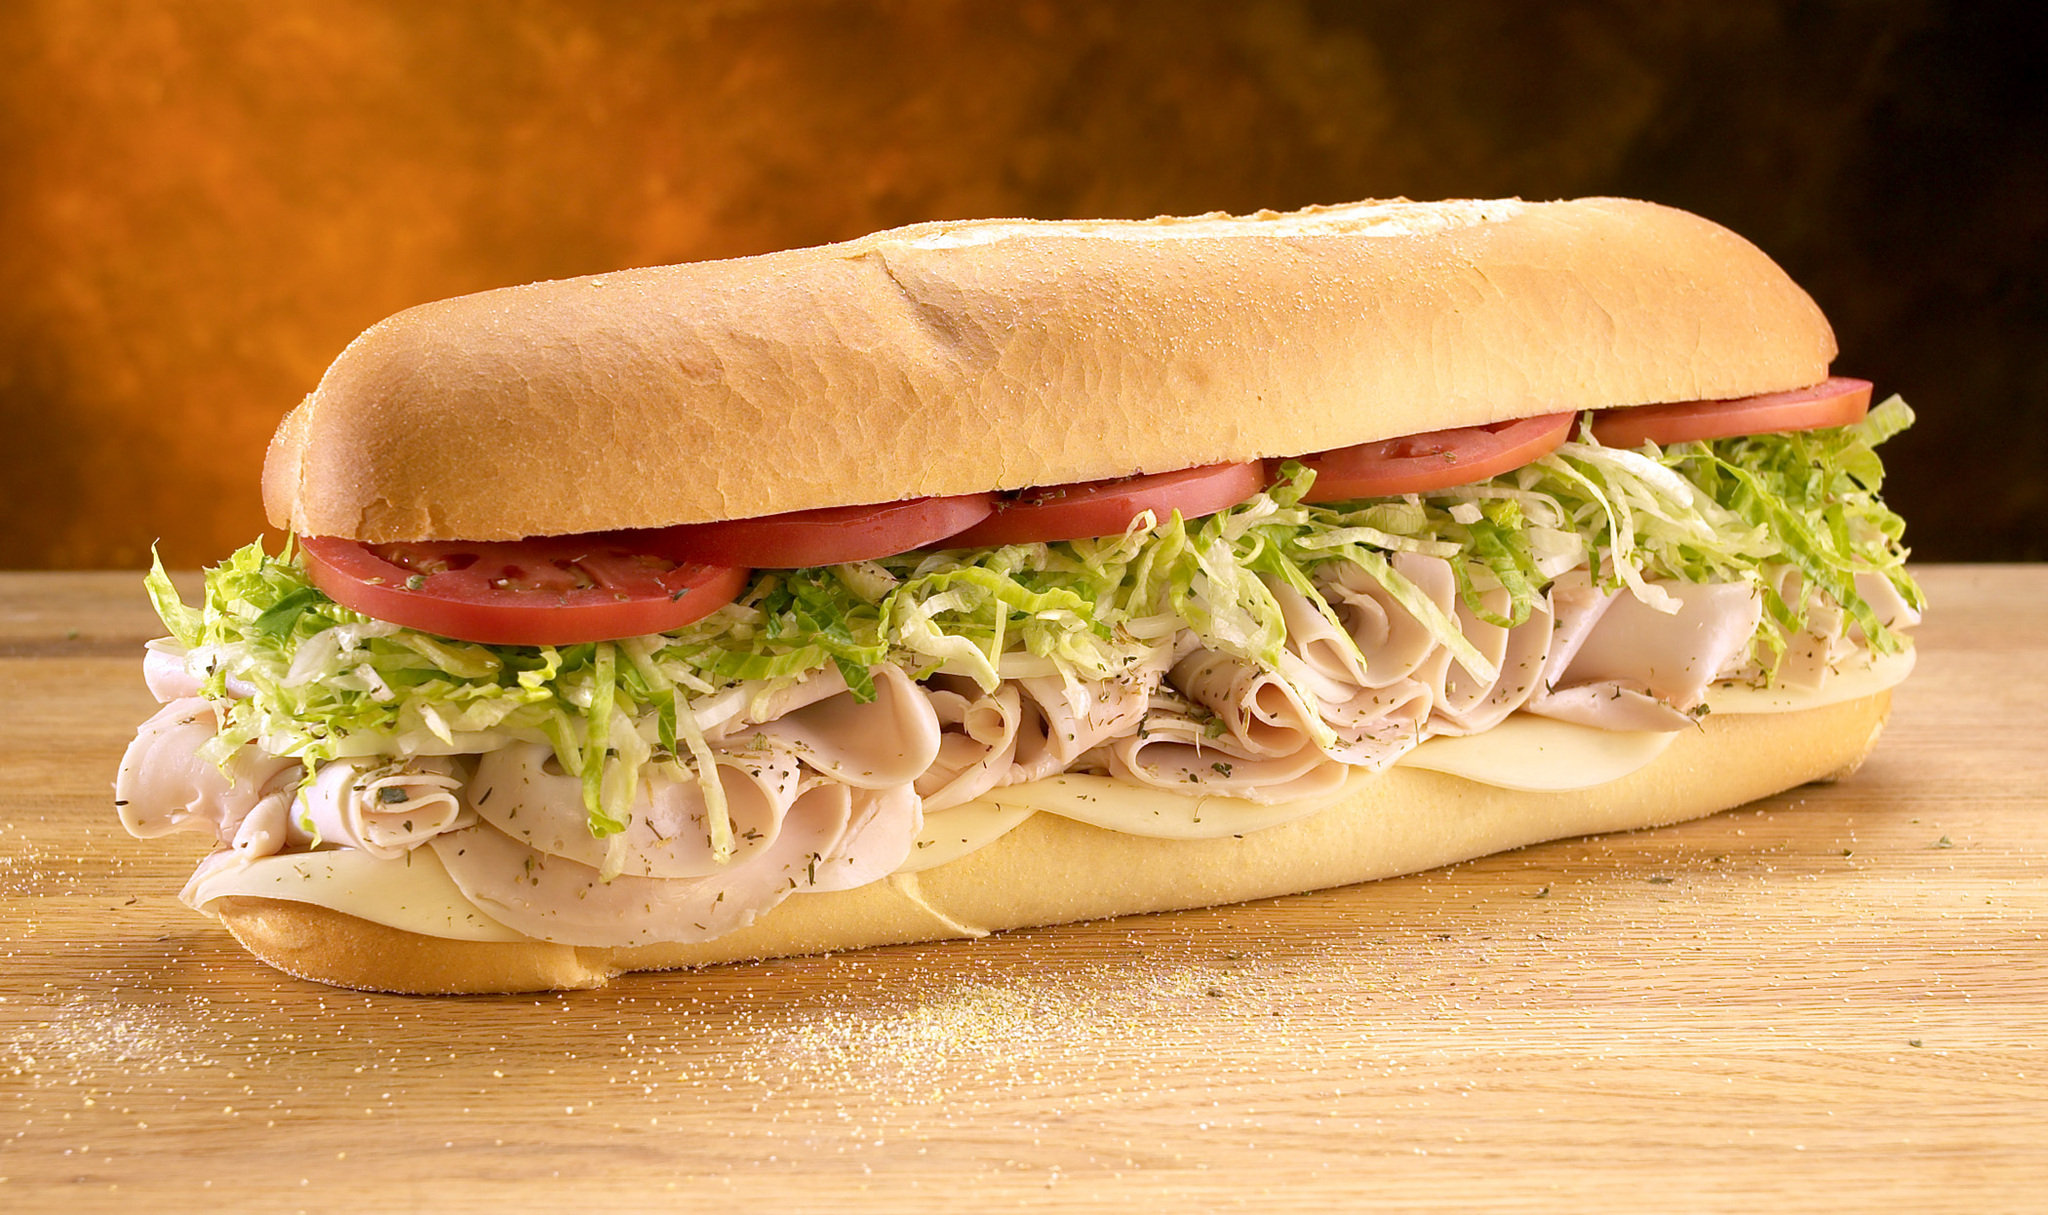 Jersey Mike’s: Enjoy BOGO subs through the app today only